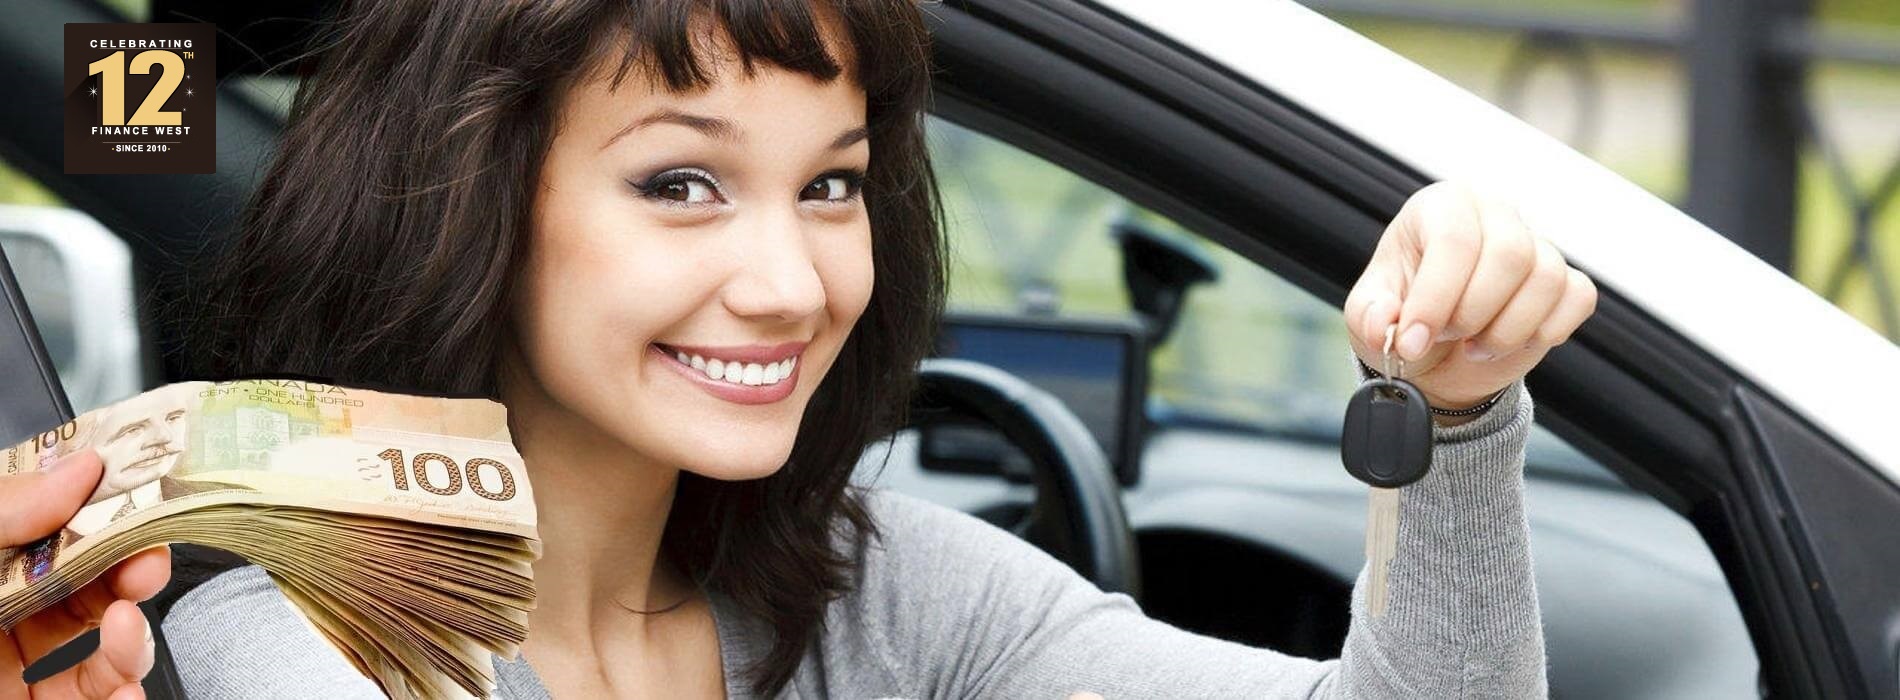 Canadian Vehicle Title Loans Provide A Valuable Financial Option